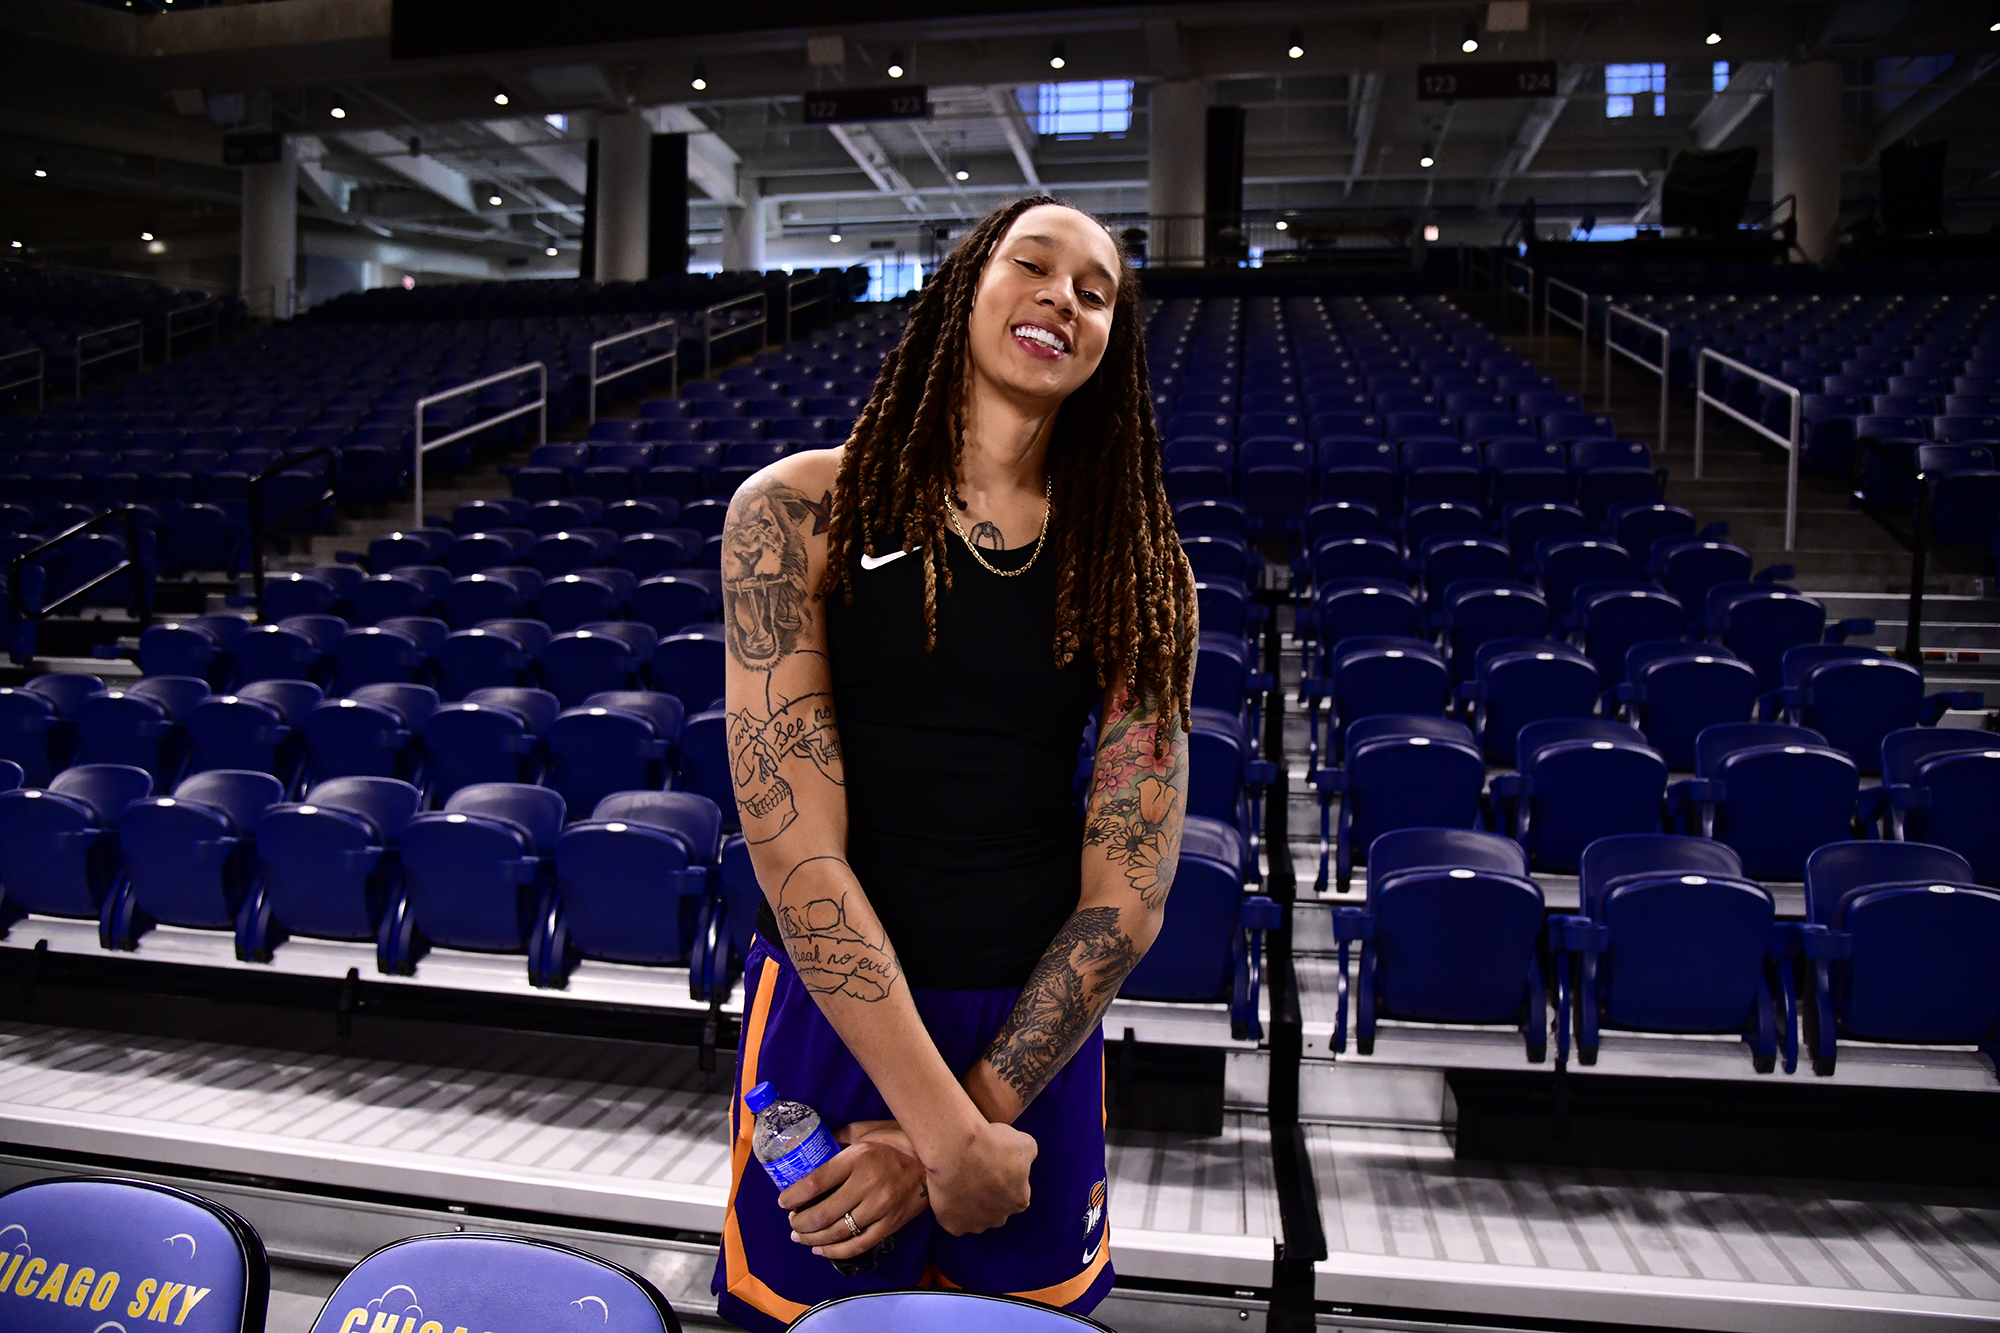 Brittney Griner #42 of the Phoenix Mercury poses for a photo at practice and media availability during the 2021 WNBA Finals on October 16, 2021, at Wintrust Arena in Chicago, Illinois. 